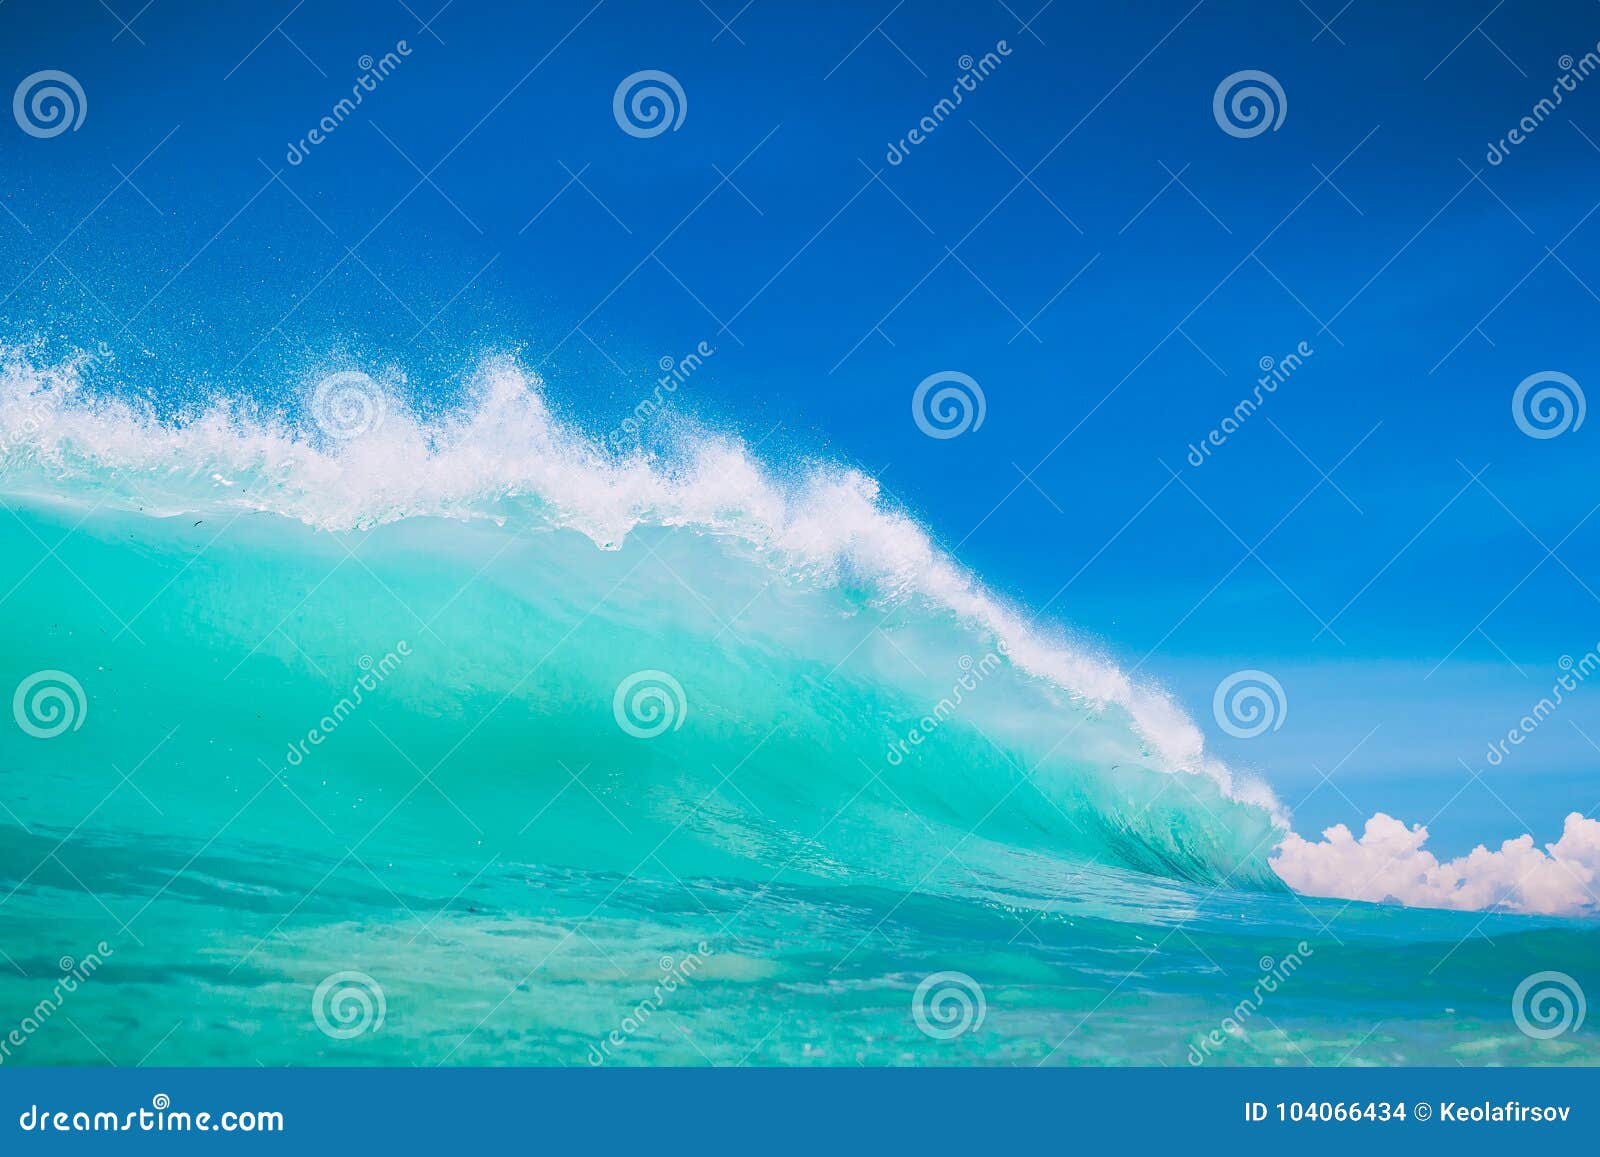 blue ocean wave at tropical beach. clear wave in tropics and blue sky